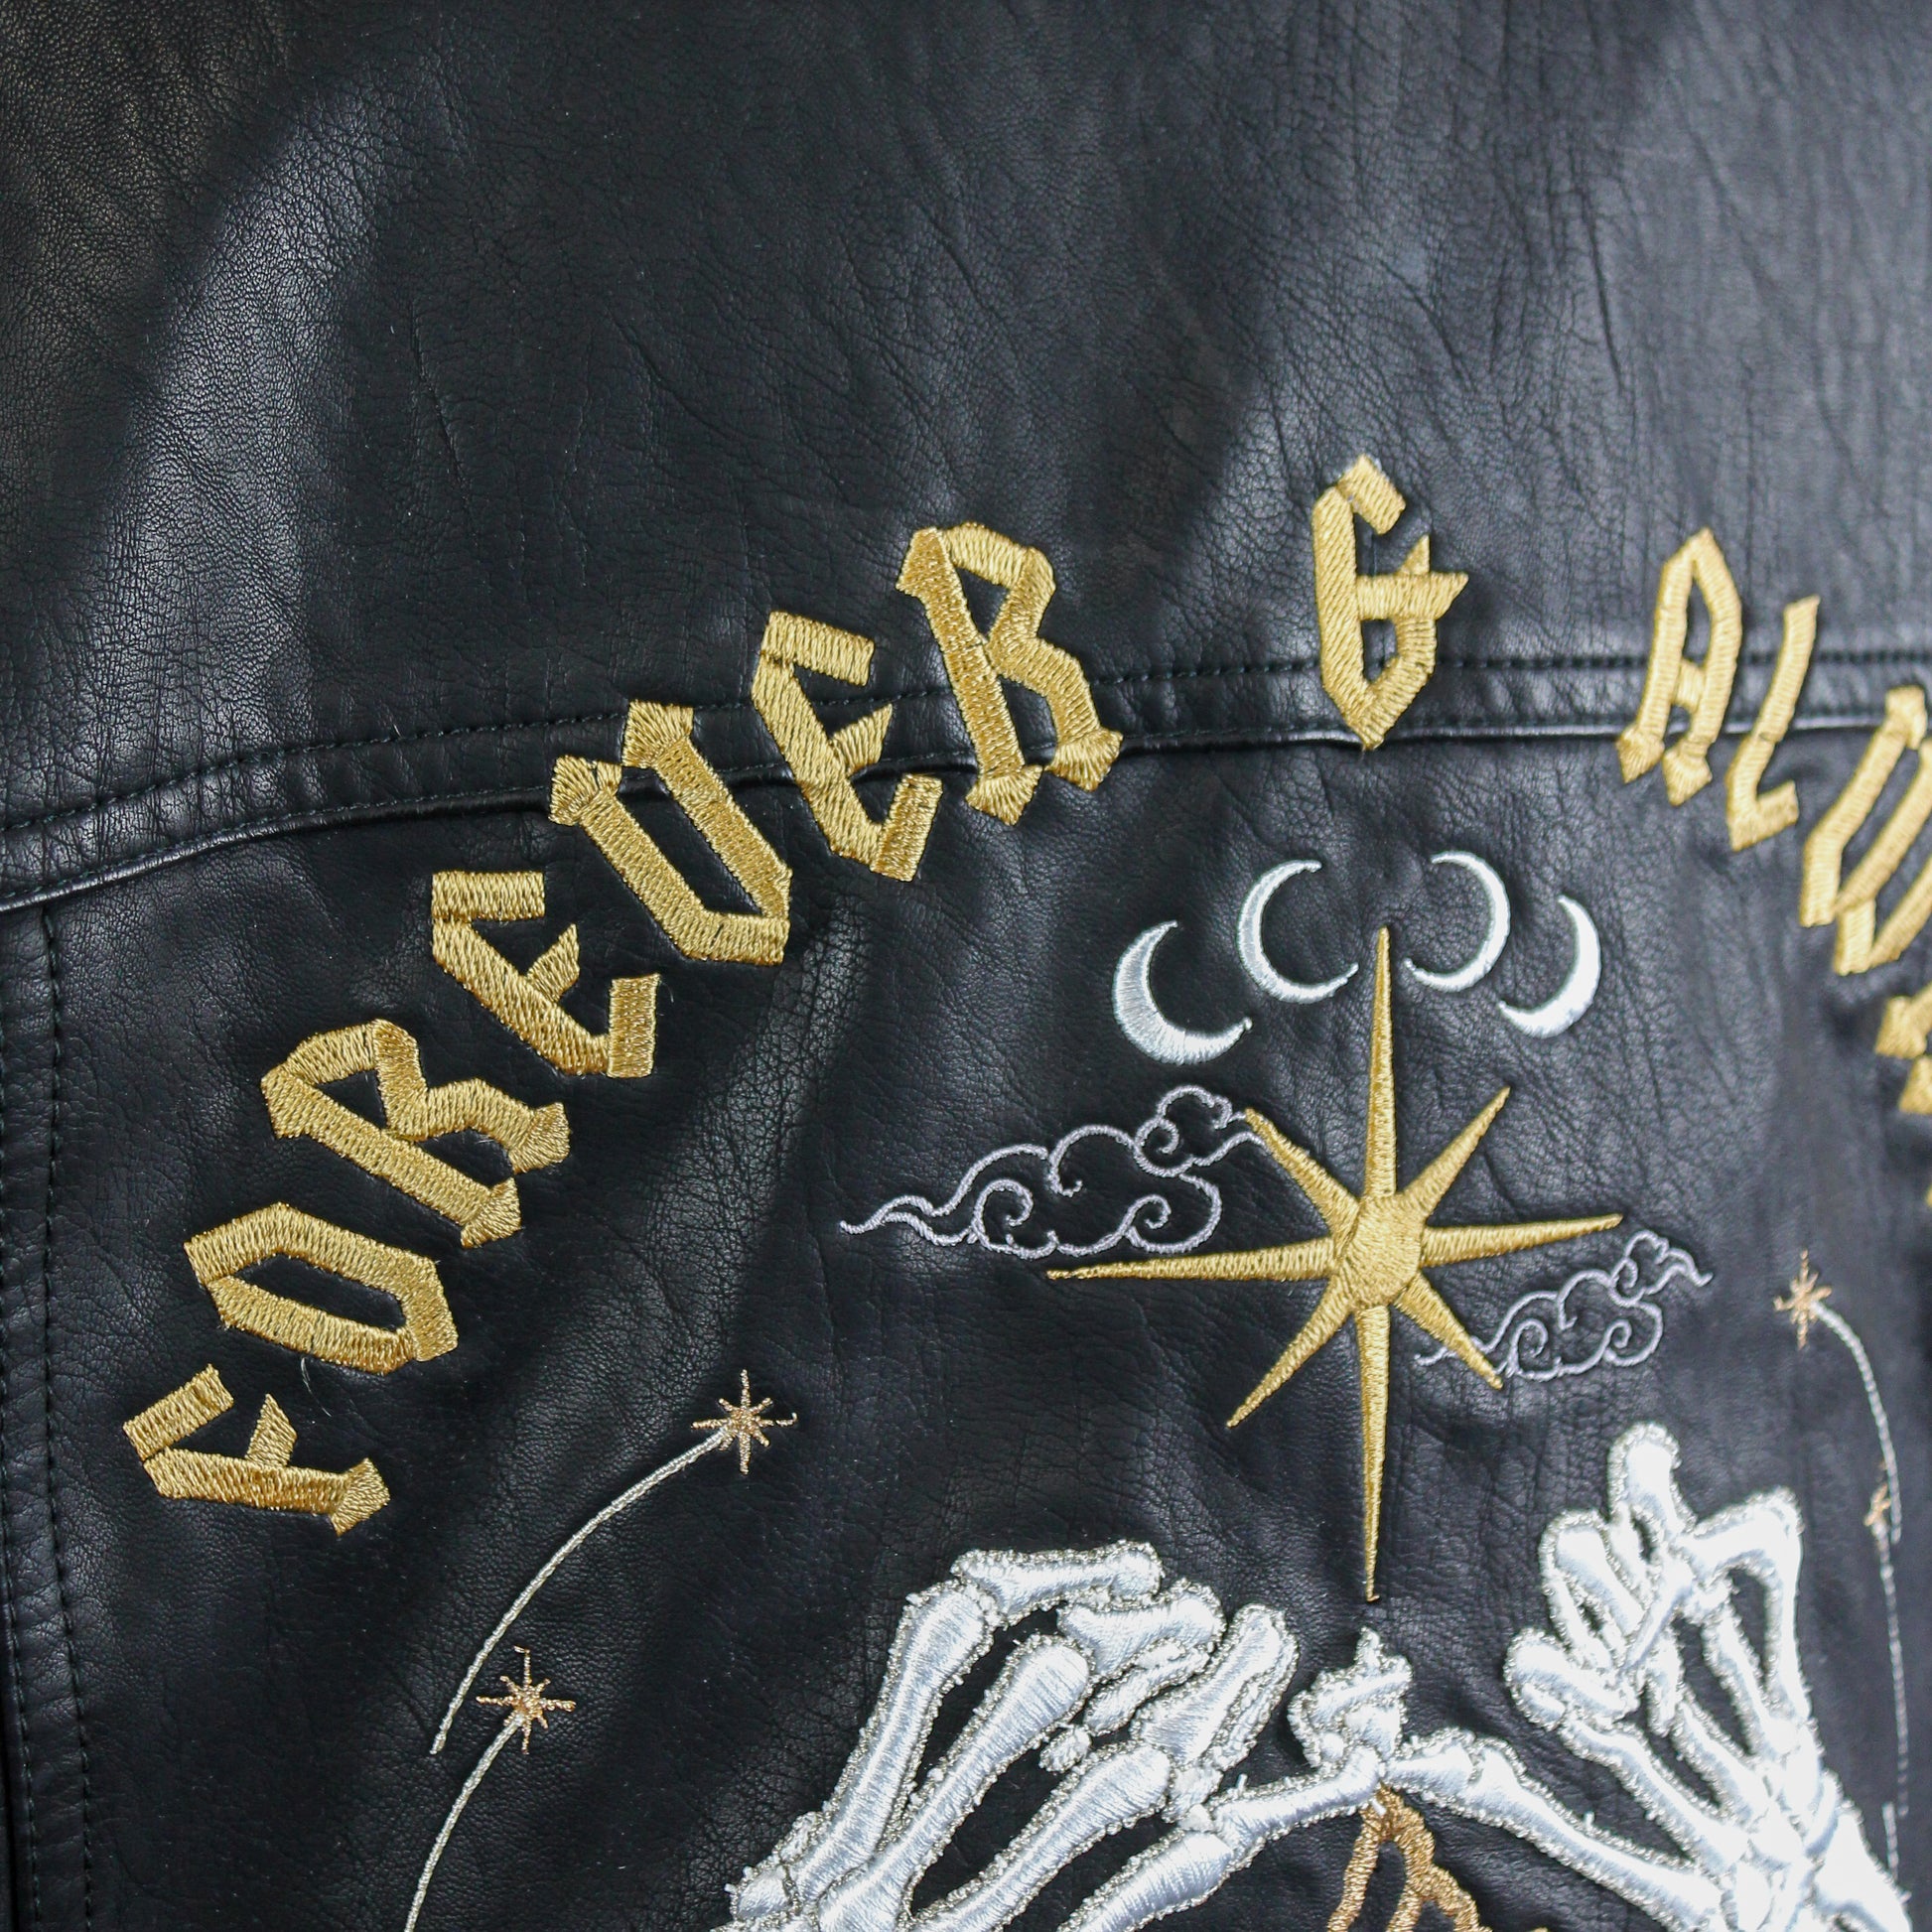 Forever & Always Celestial Bride's custom leather jacket for a bold and distinctive wedding look